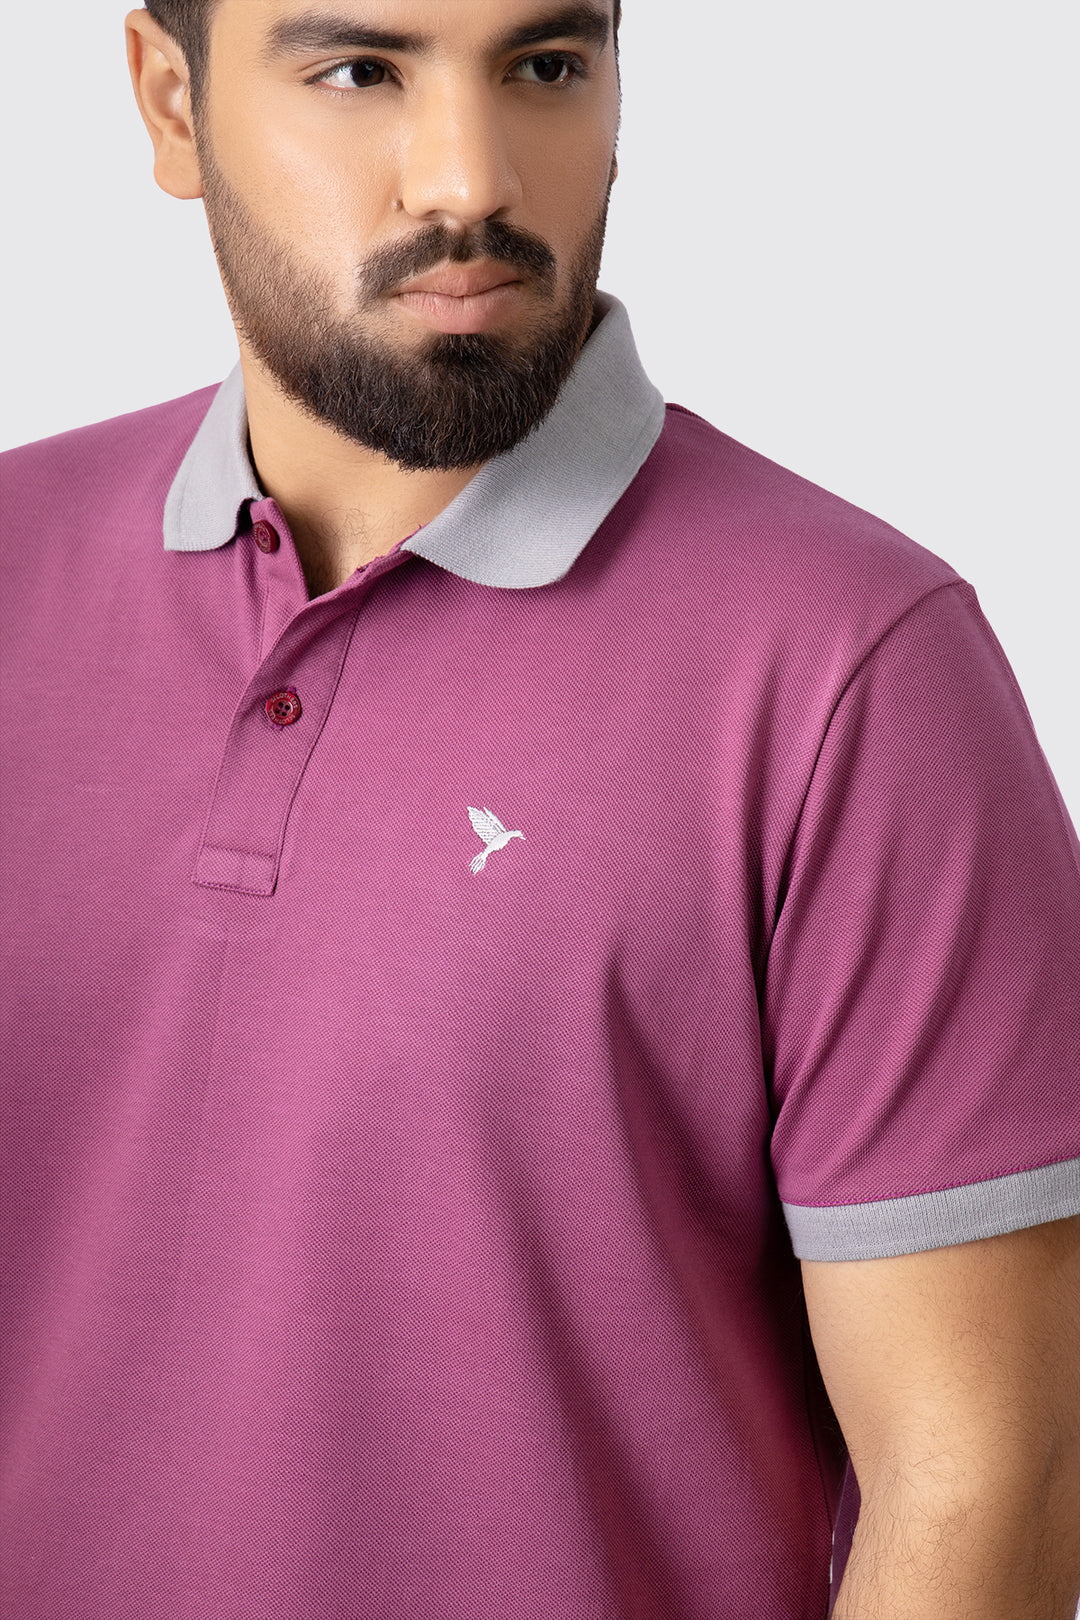 Plum Purple Contrast Embroidered Polo Shirt (Plus Size) - A23 - MP0203P